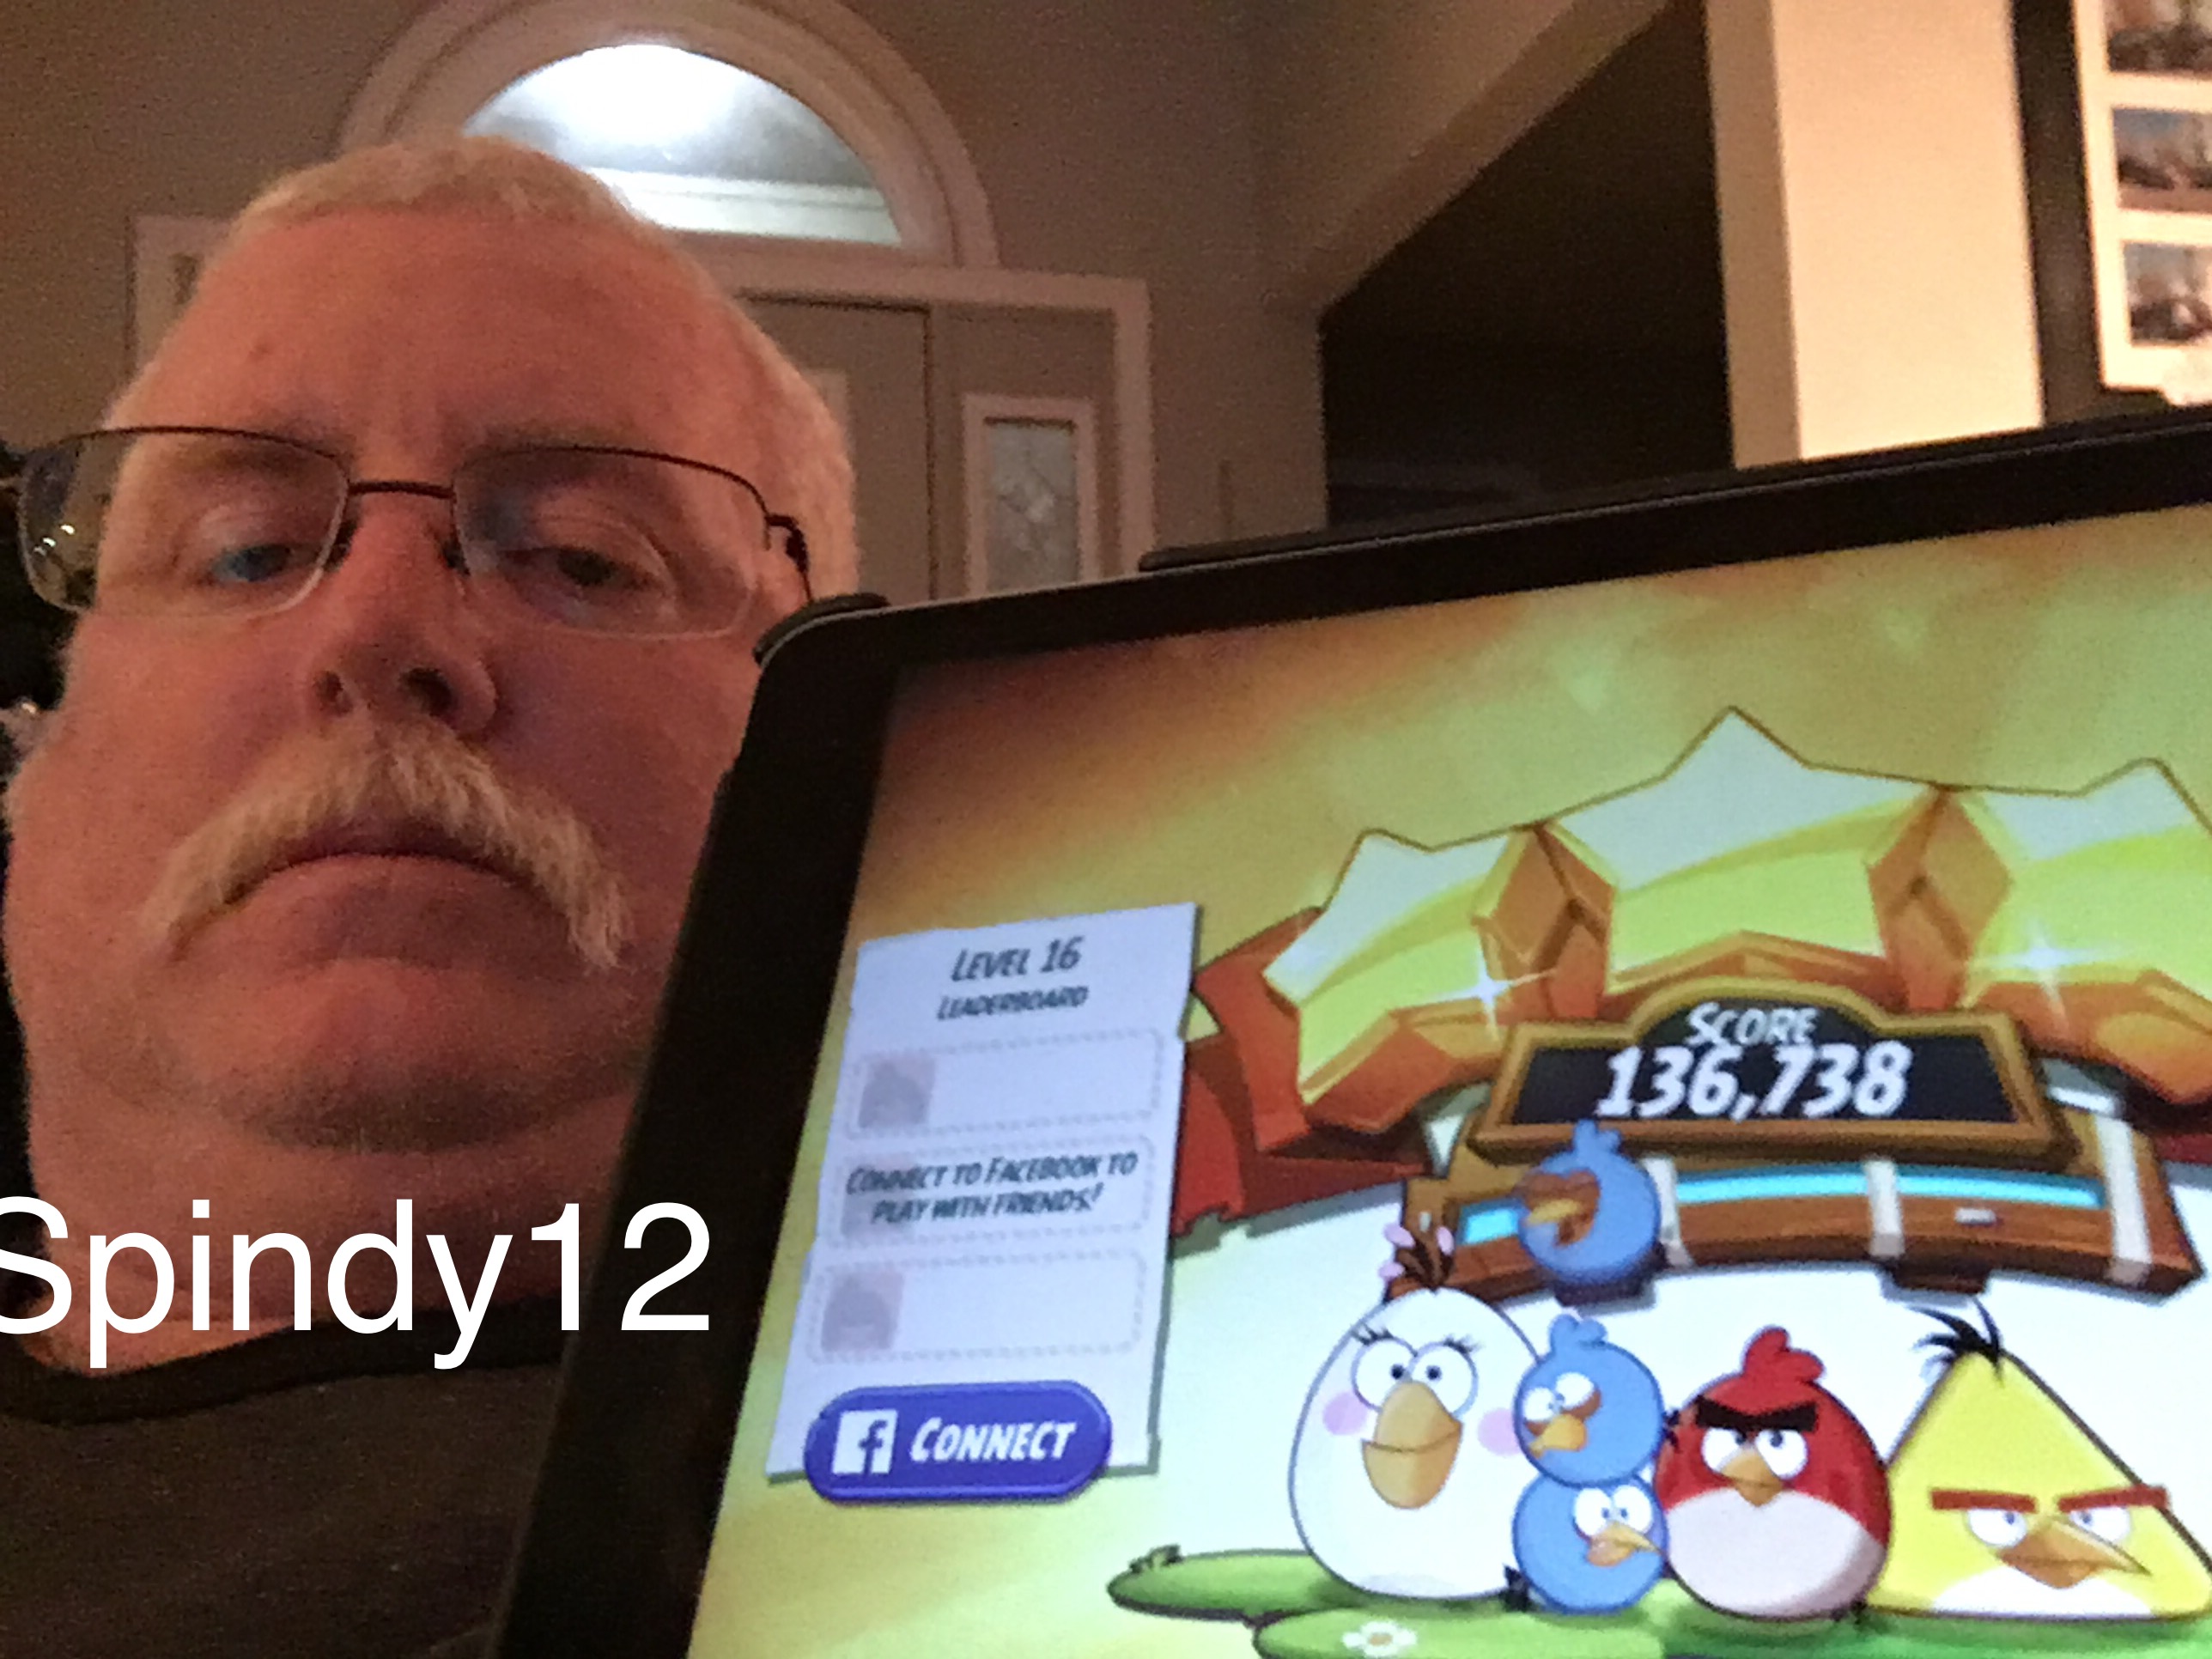 Angry Birds 2: Level 16 136,738 points